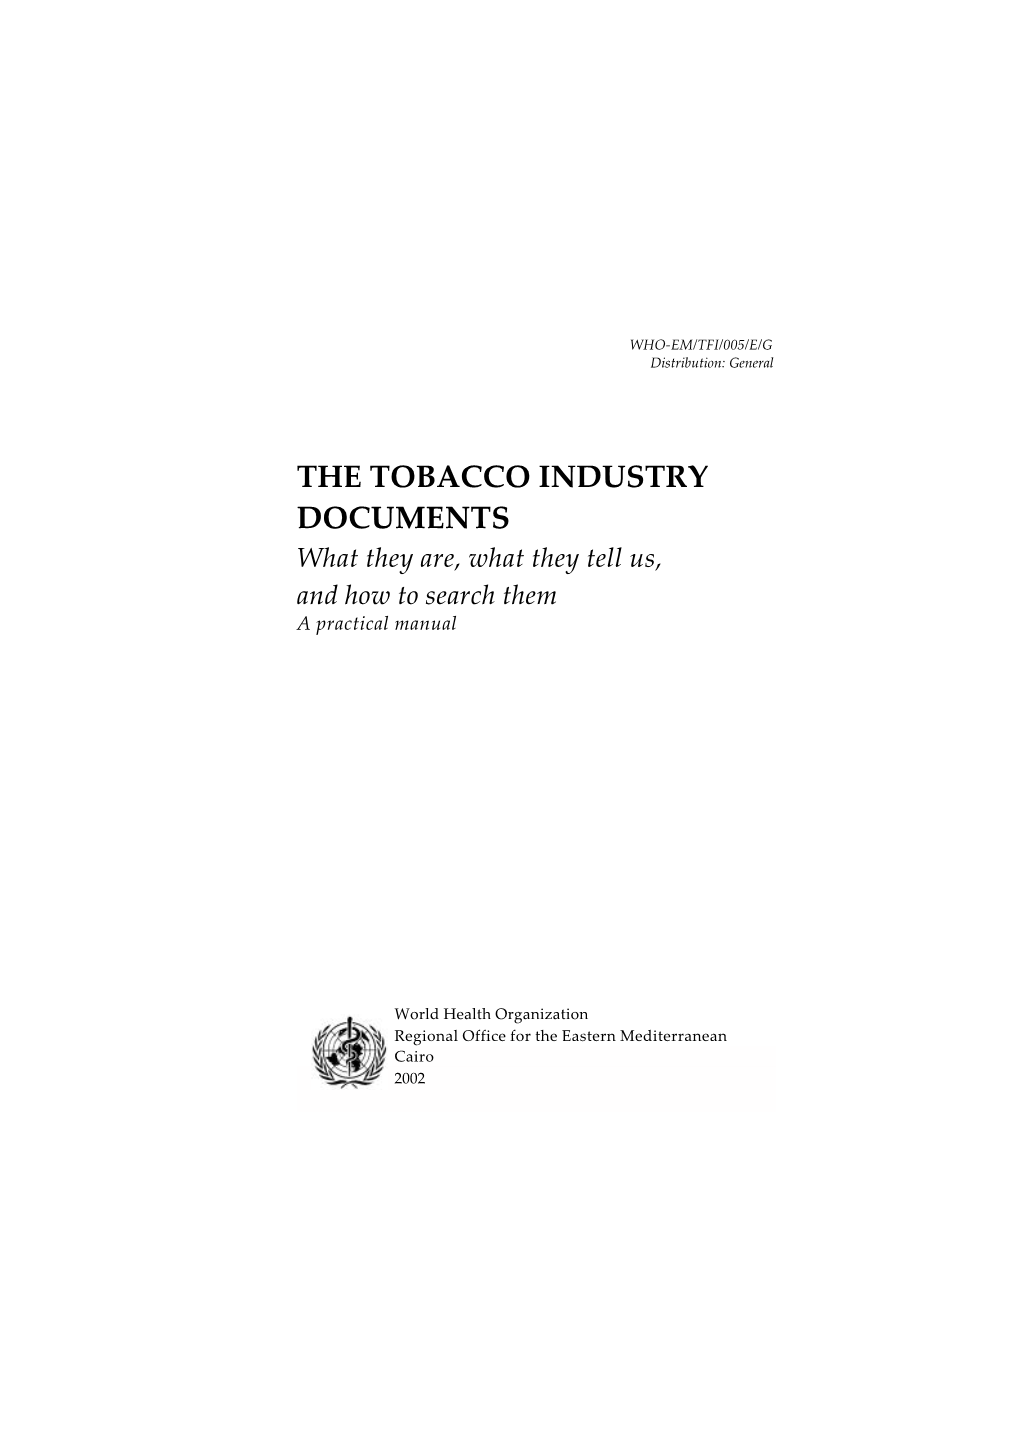 THE TOBACCO INDUSTRY DOCUMENTS What They Are, What They Tell Us, and How to Search Them a Practical Manual